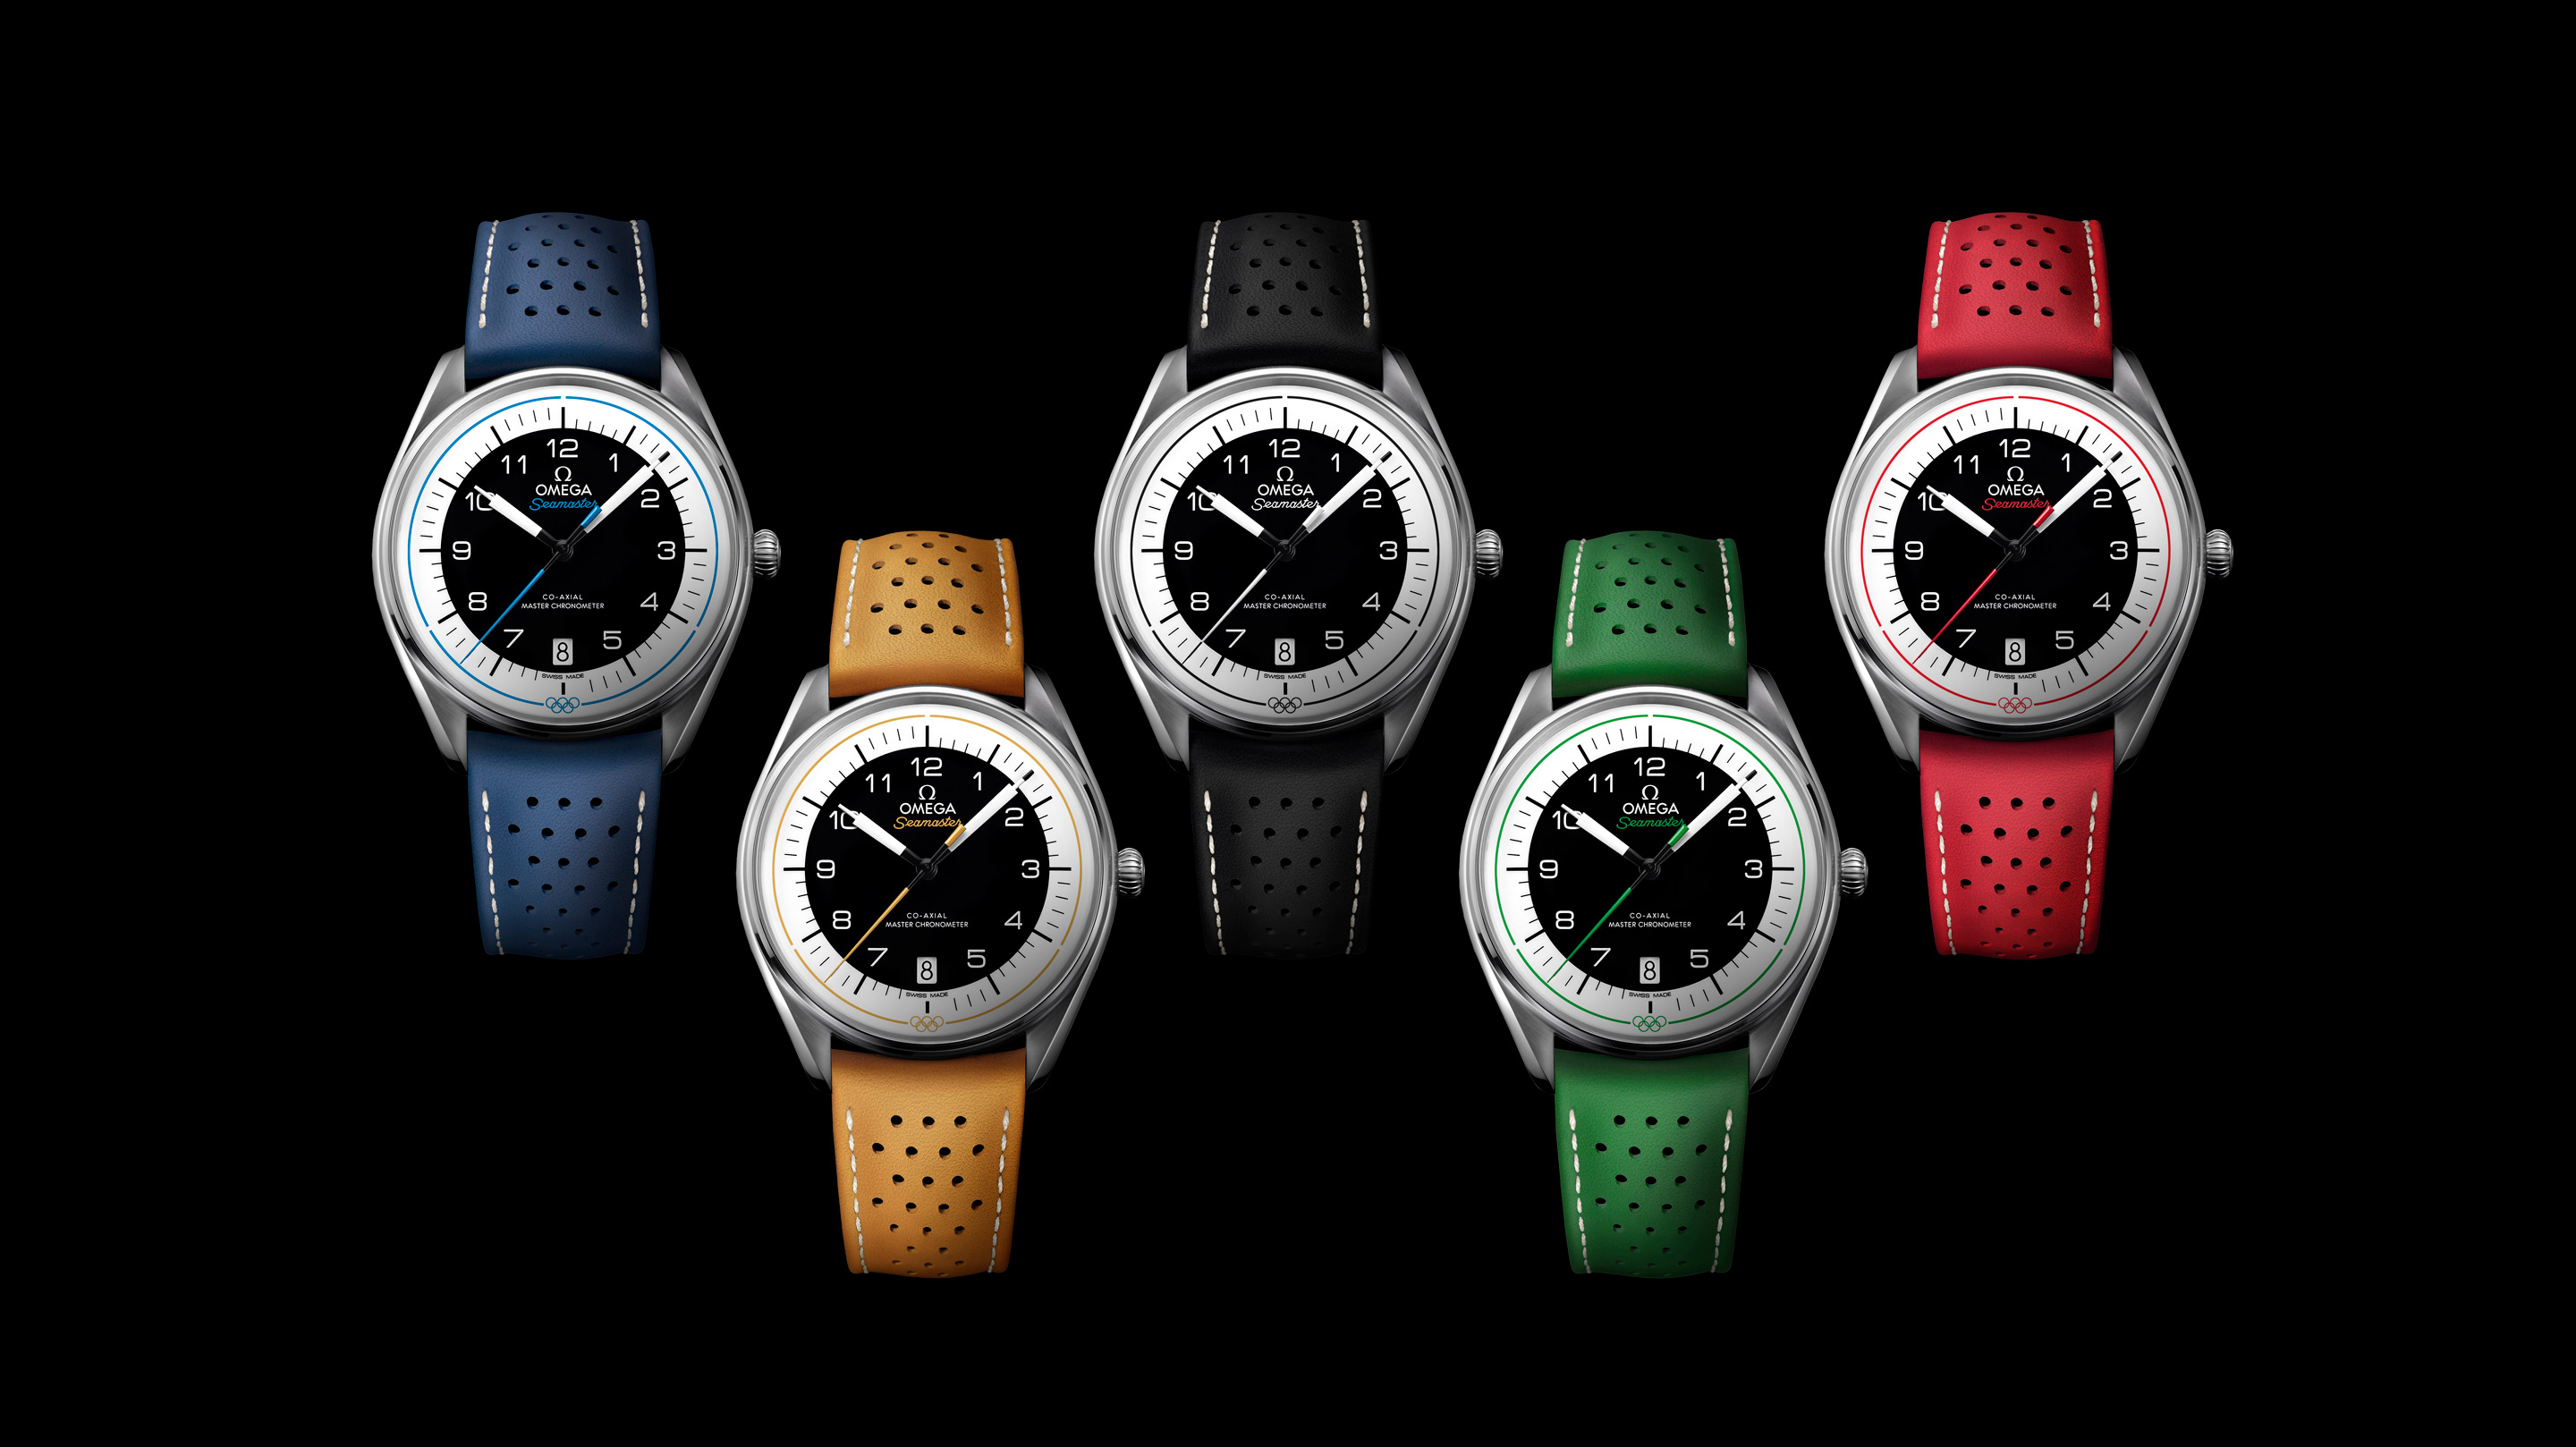 The Omega Seamaster Olympic Games 